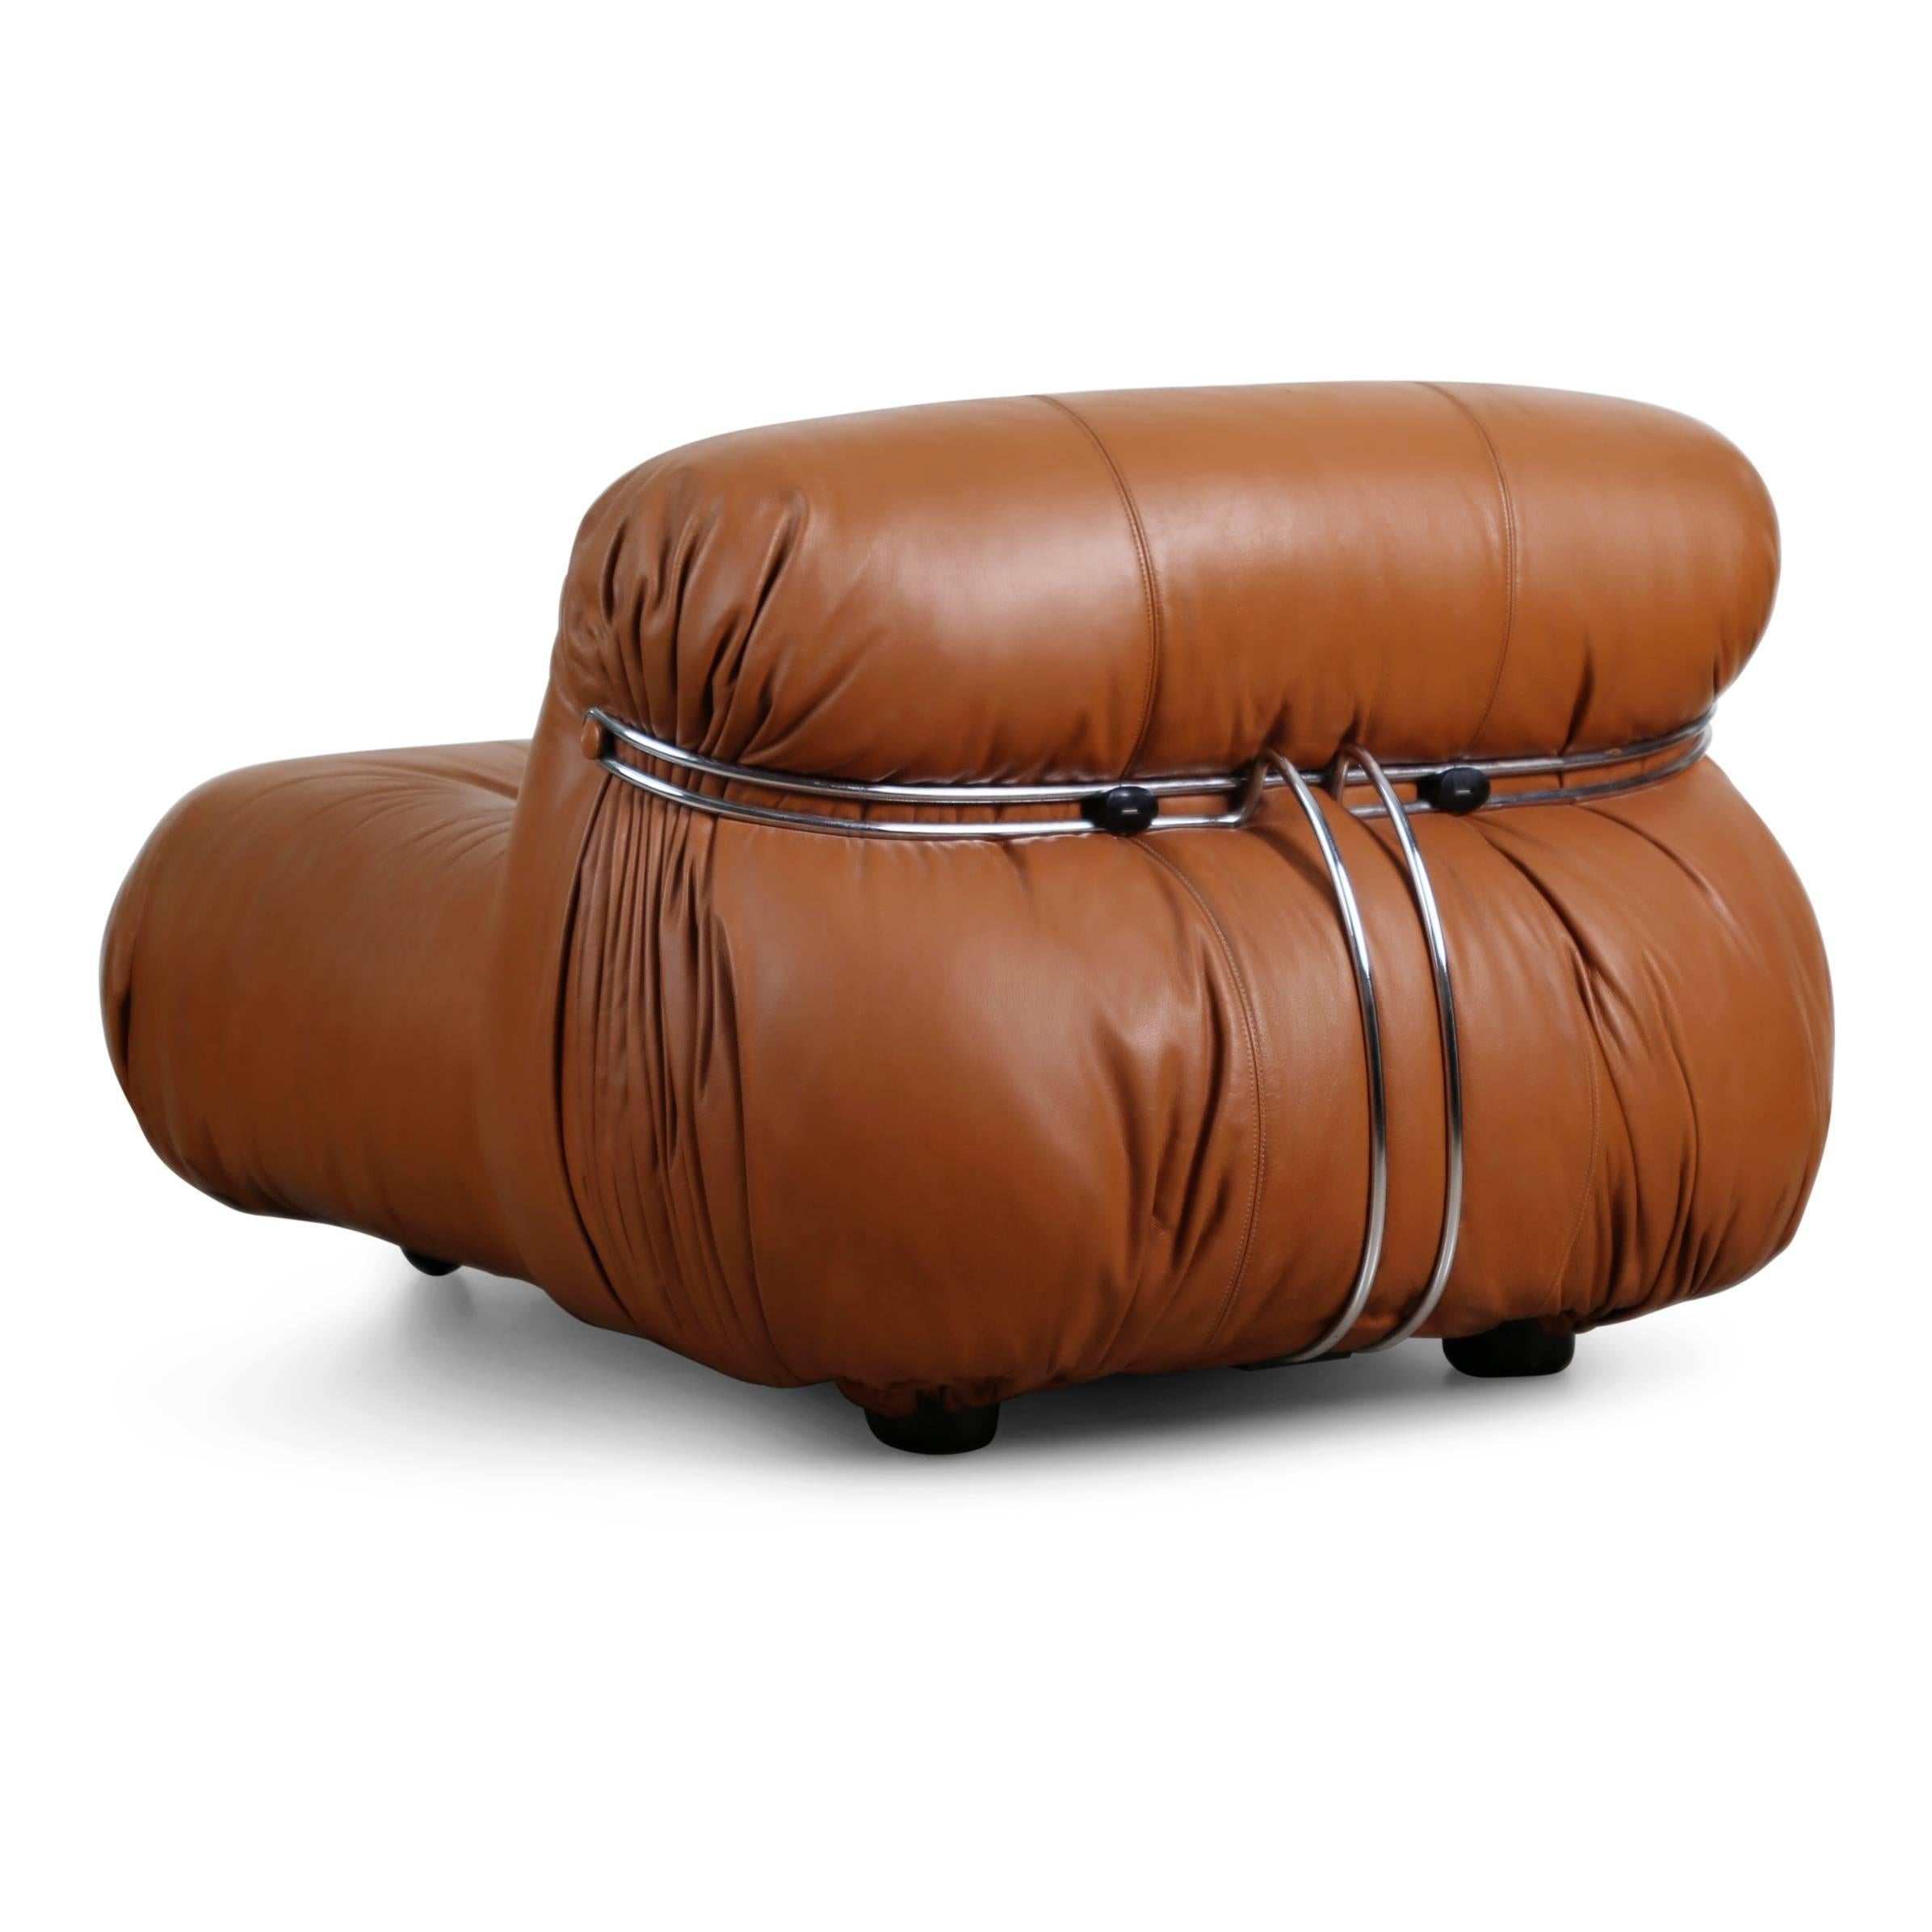 Mid-20th Century Soriana Lounge Chair in Cognac Leather by Afra & Tobia Scarpa for Cassina